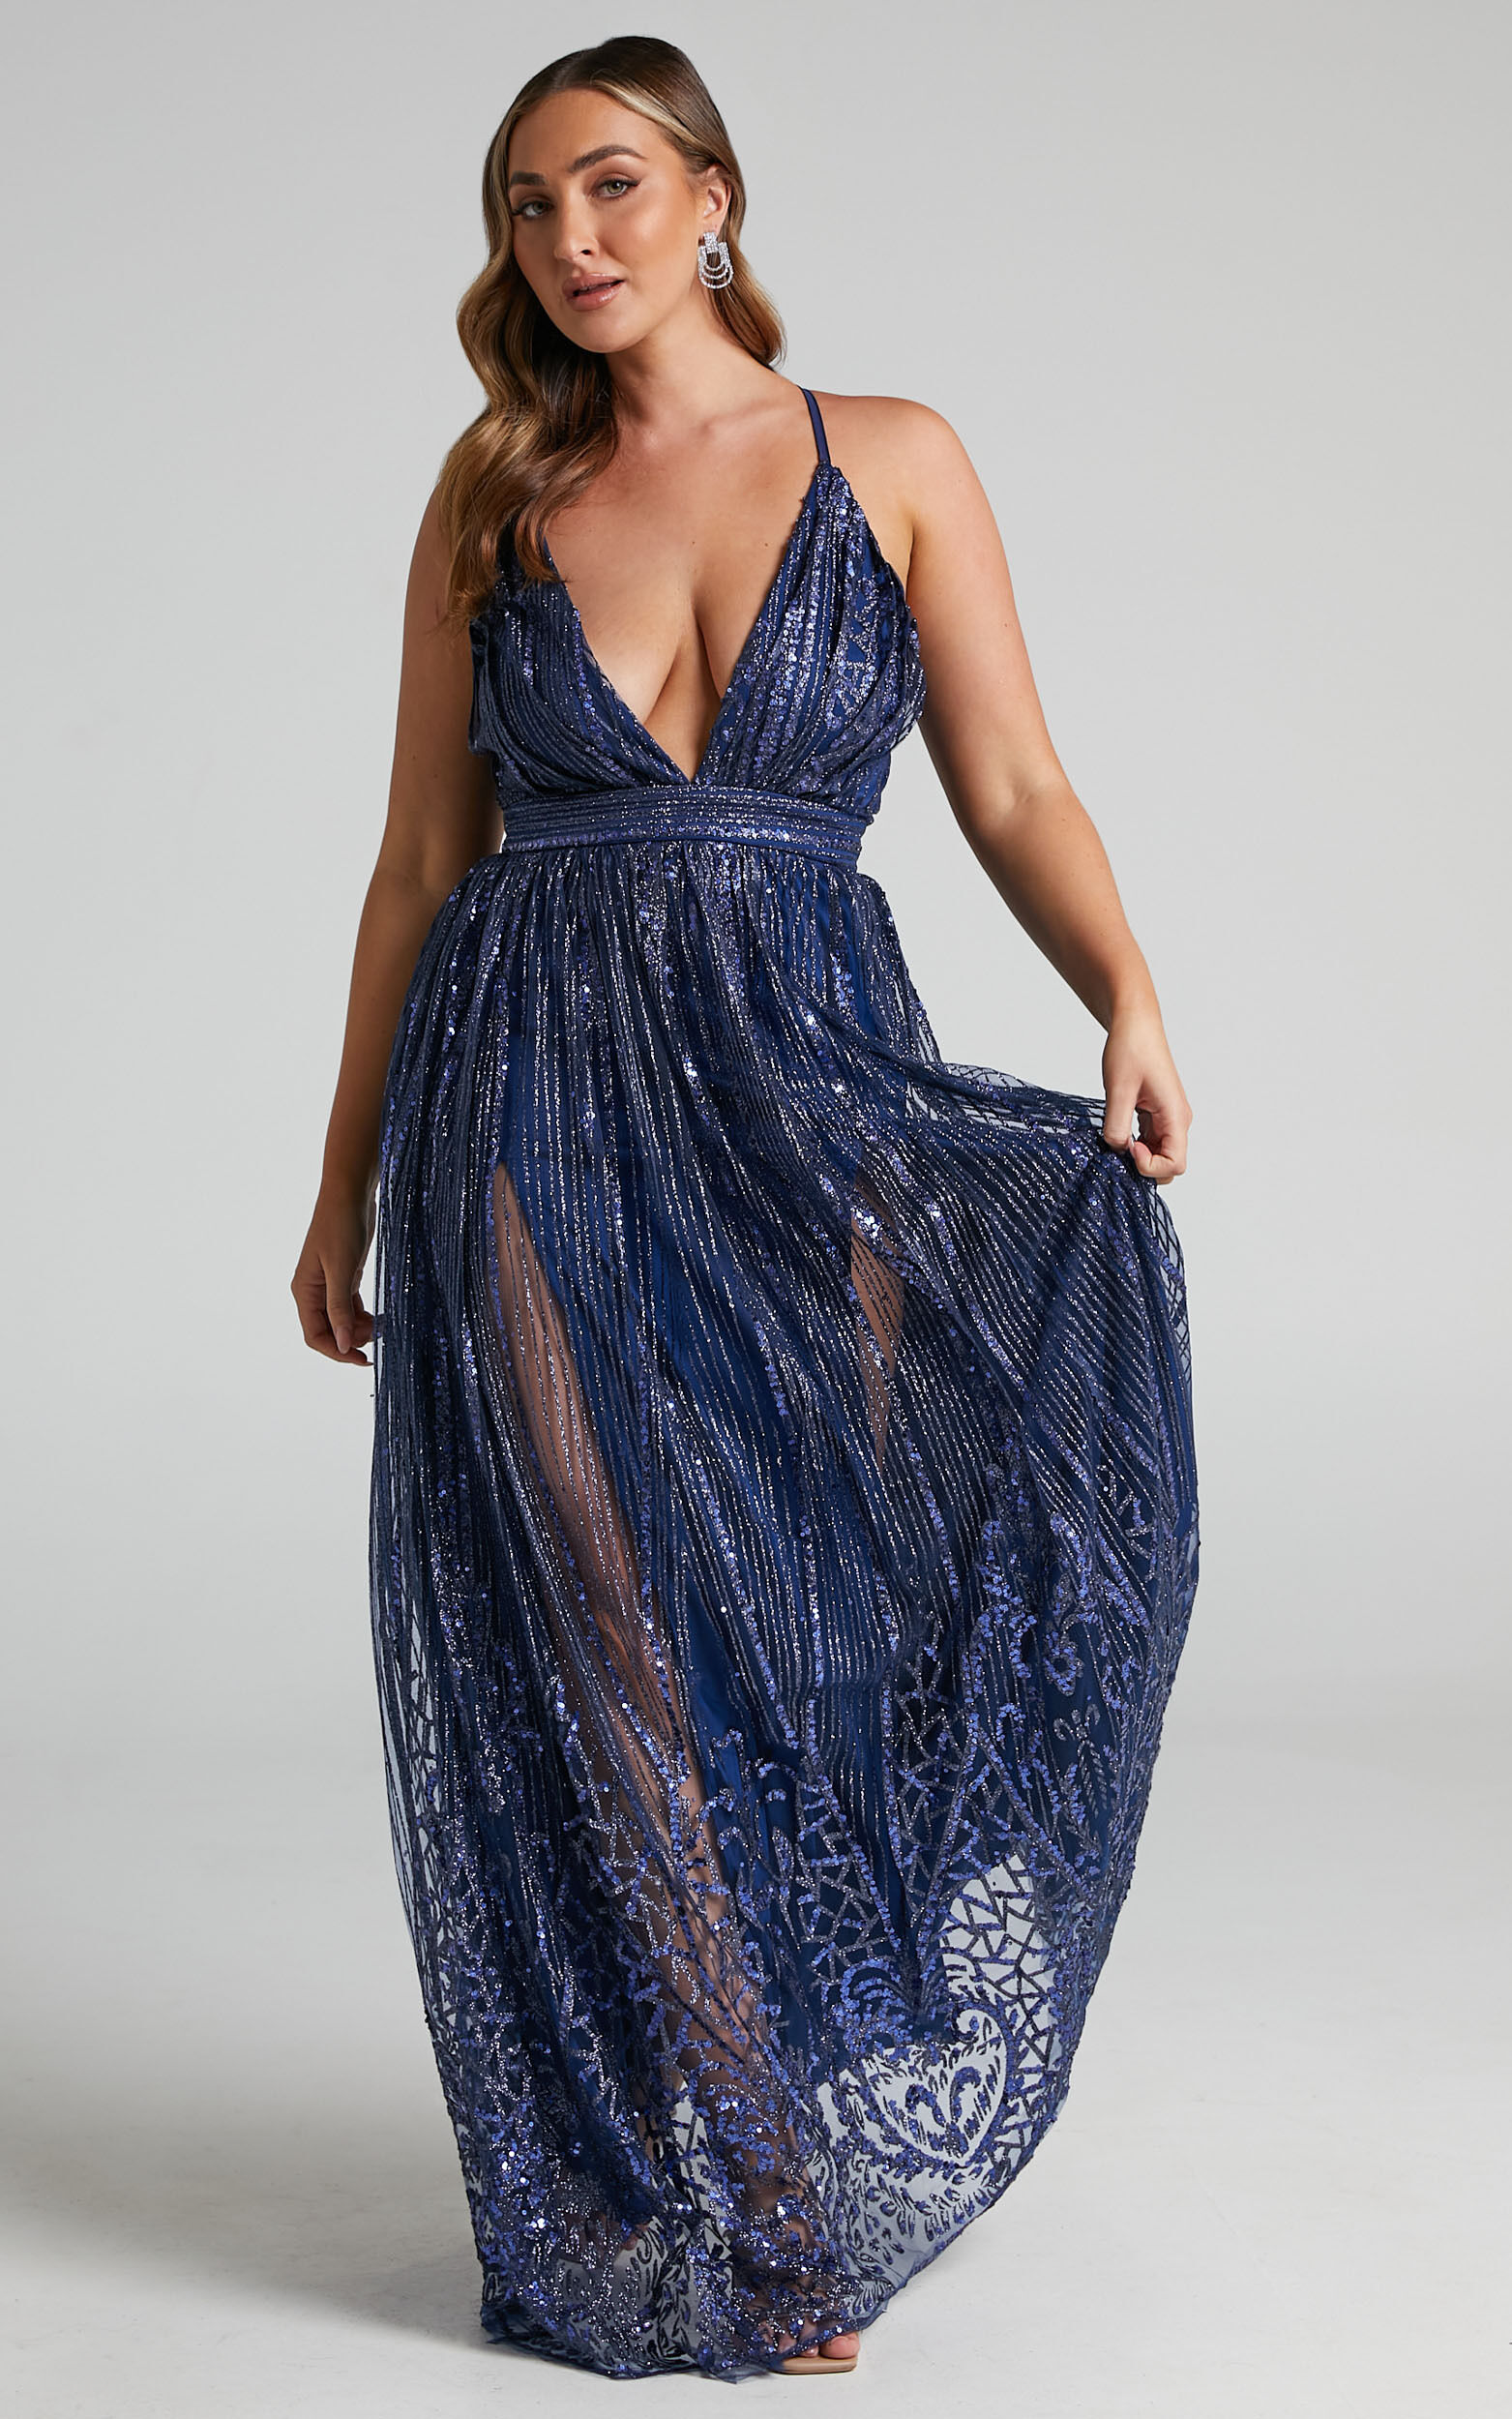 Paola Metallic Plunge Maxi Dress in Navy - 04, NVY3, super-hi-res image number null